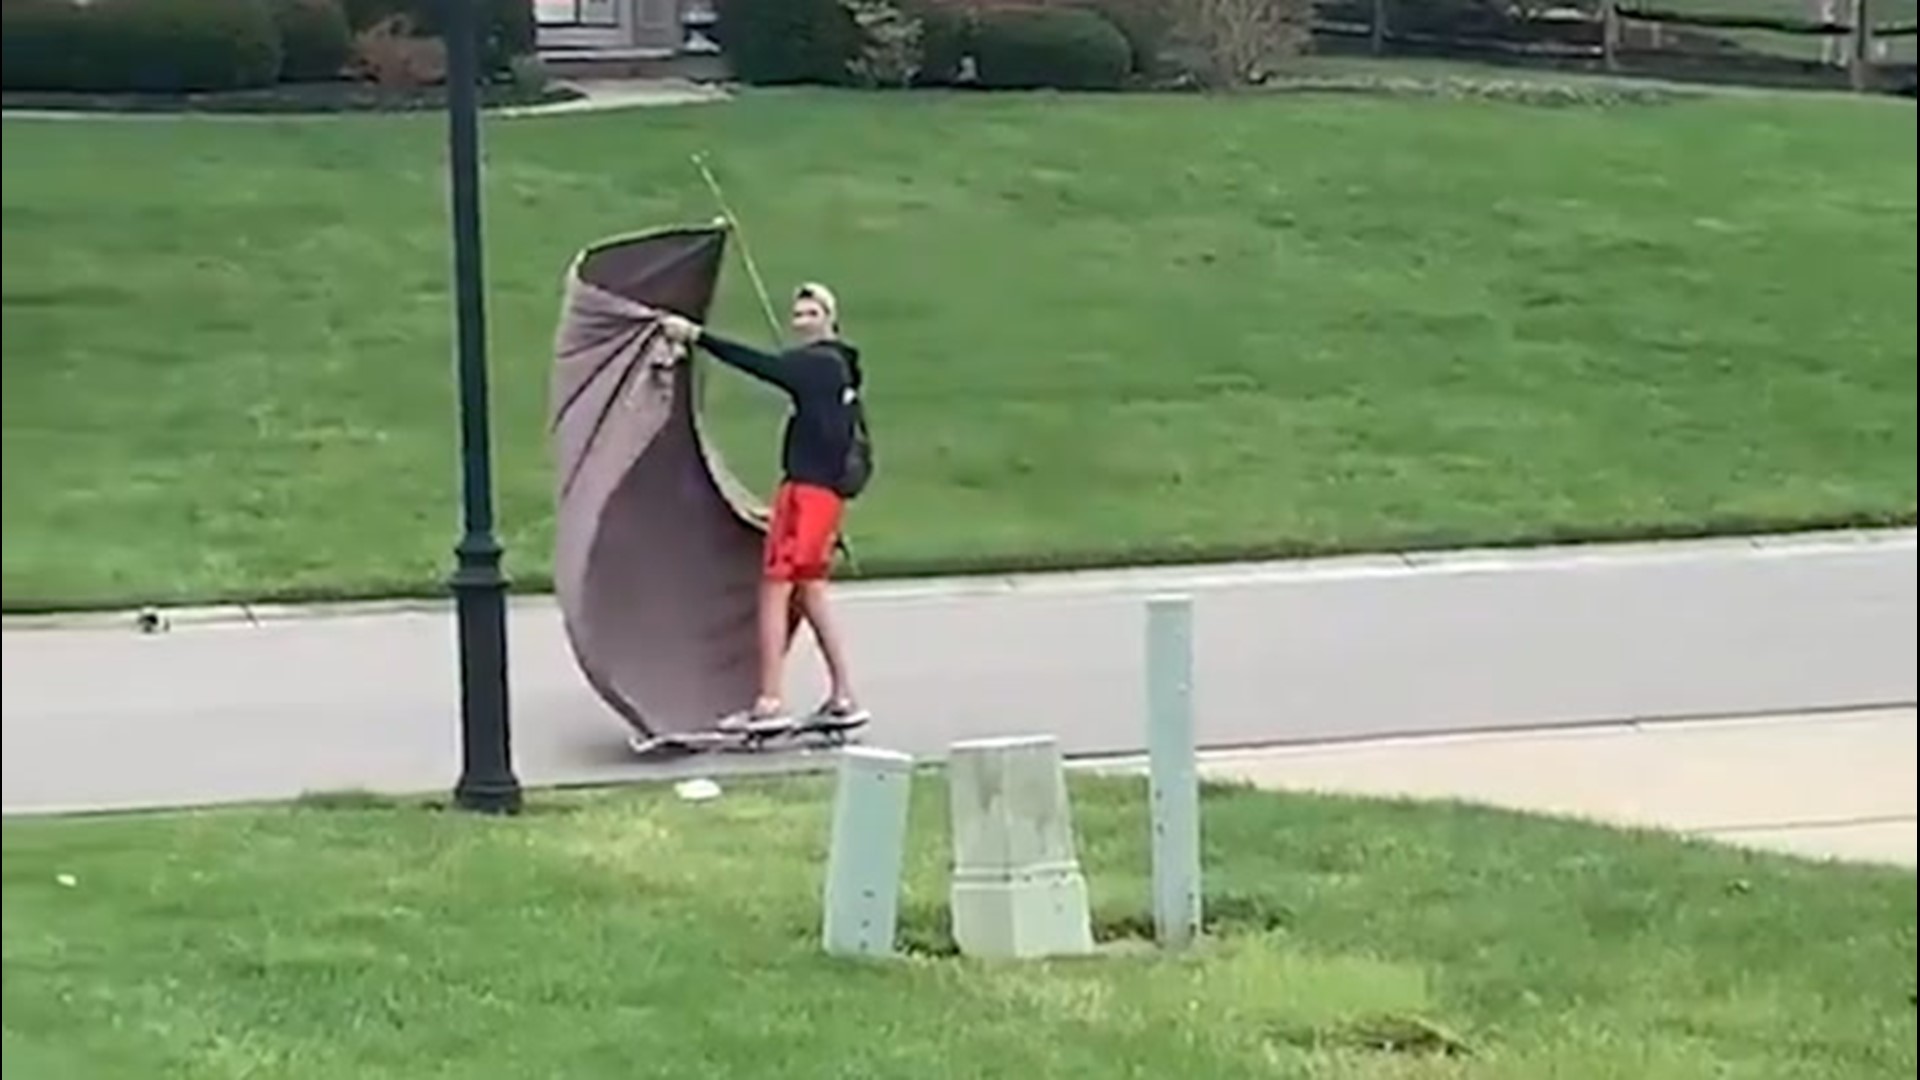 As winds picked up in Ohio on Sunday, March 28, one teen combined a skateboard with a stick and a large piece of cloth to 'sail' down his neighborhood street.